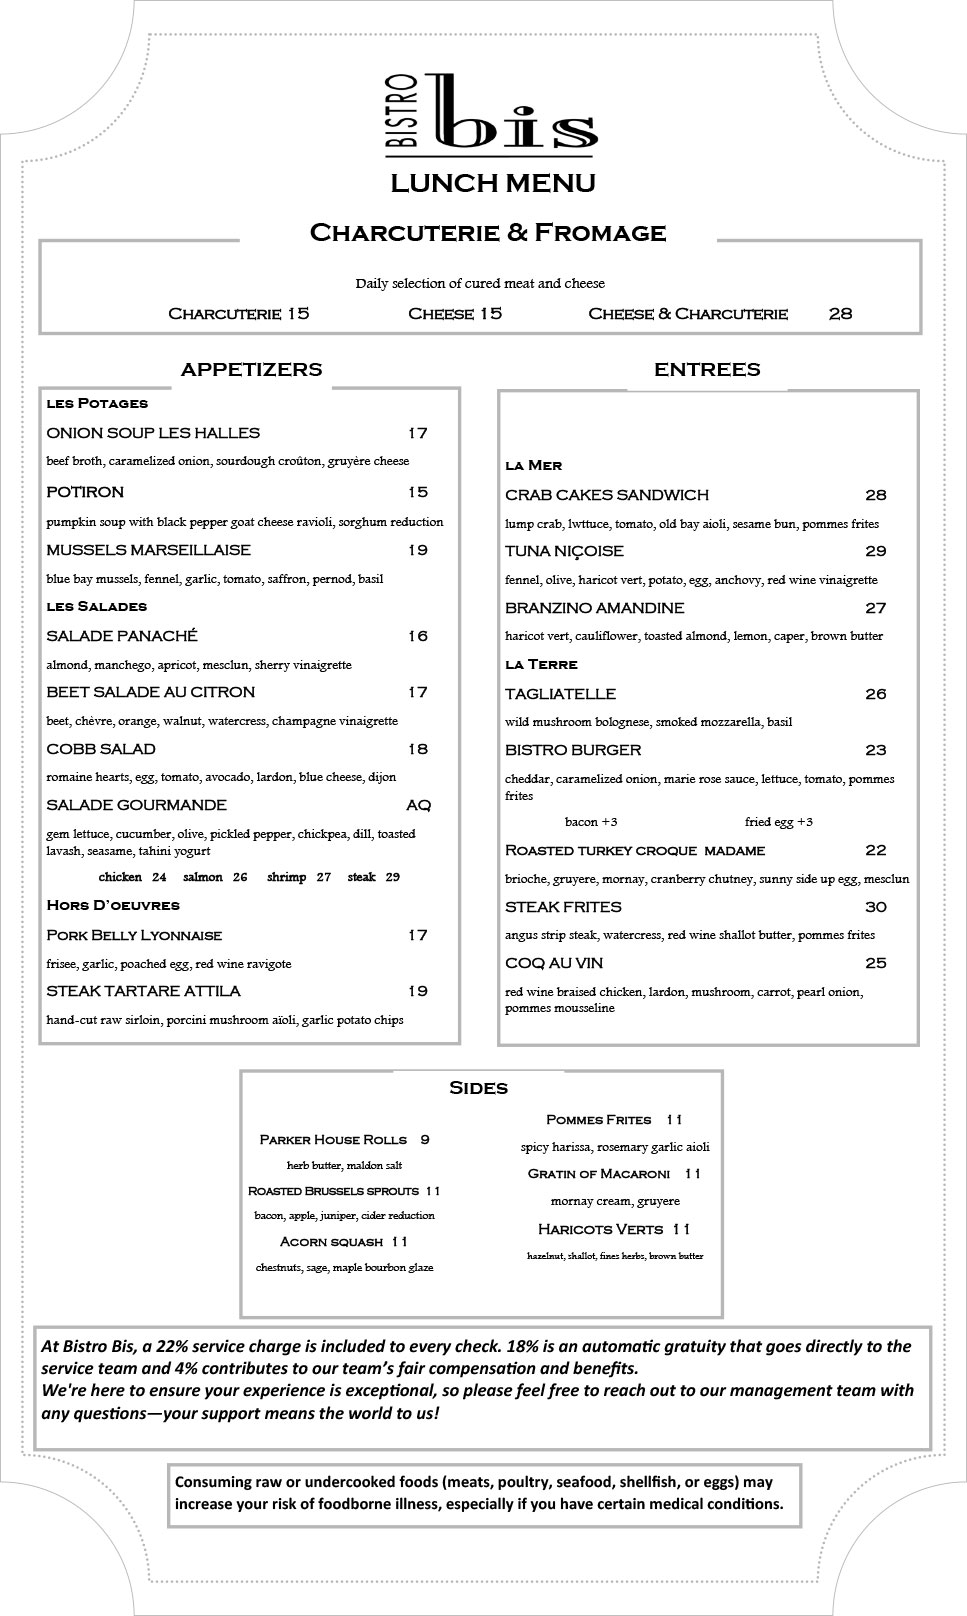 Image of Bistro Bis Lunch menu featuring French cuisine